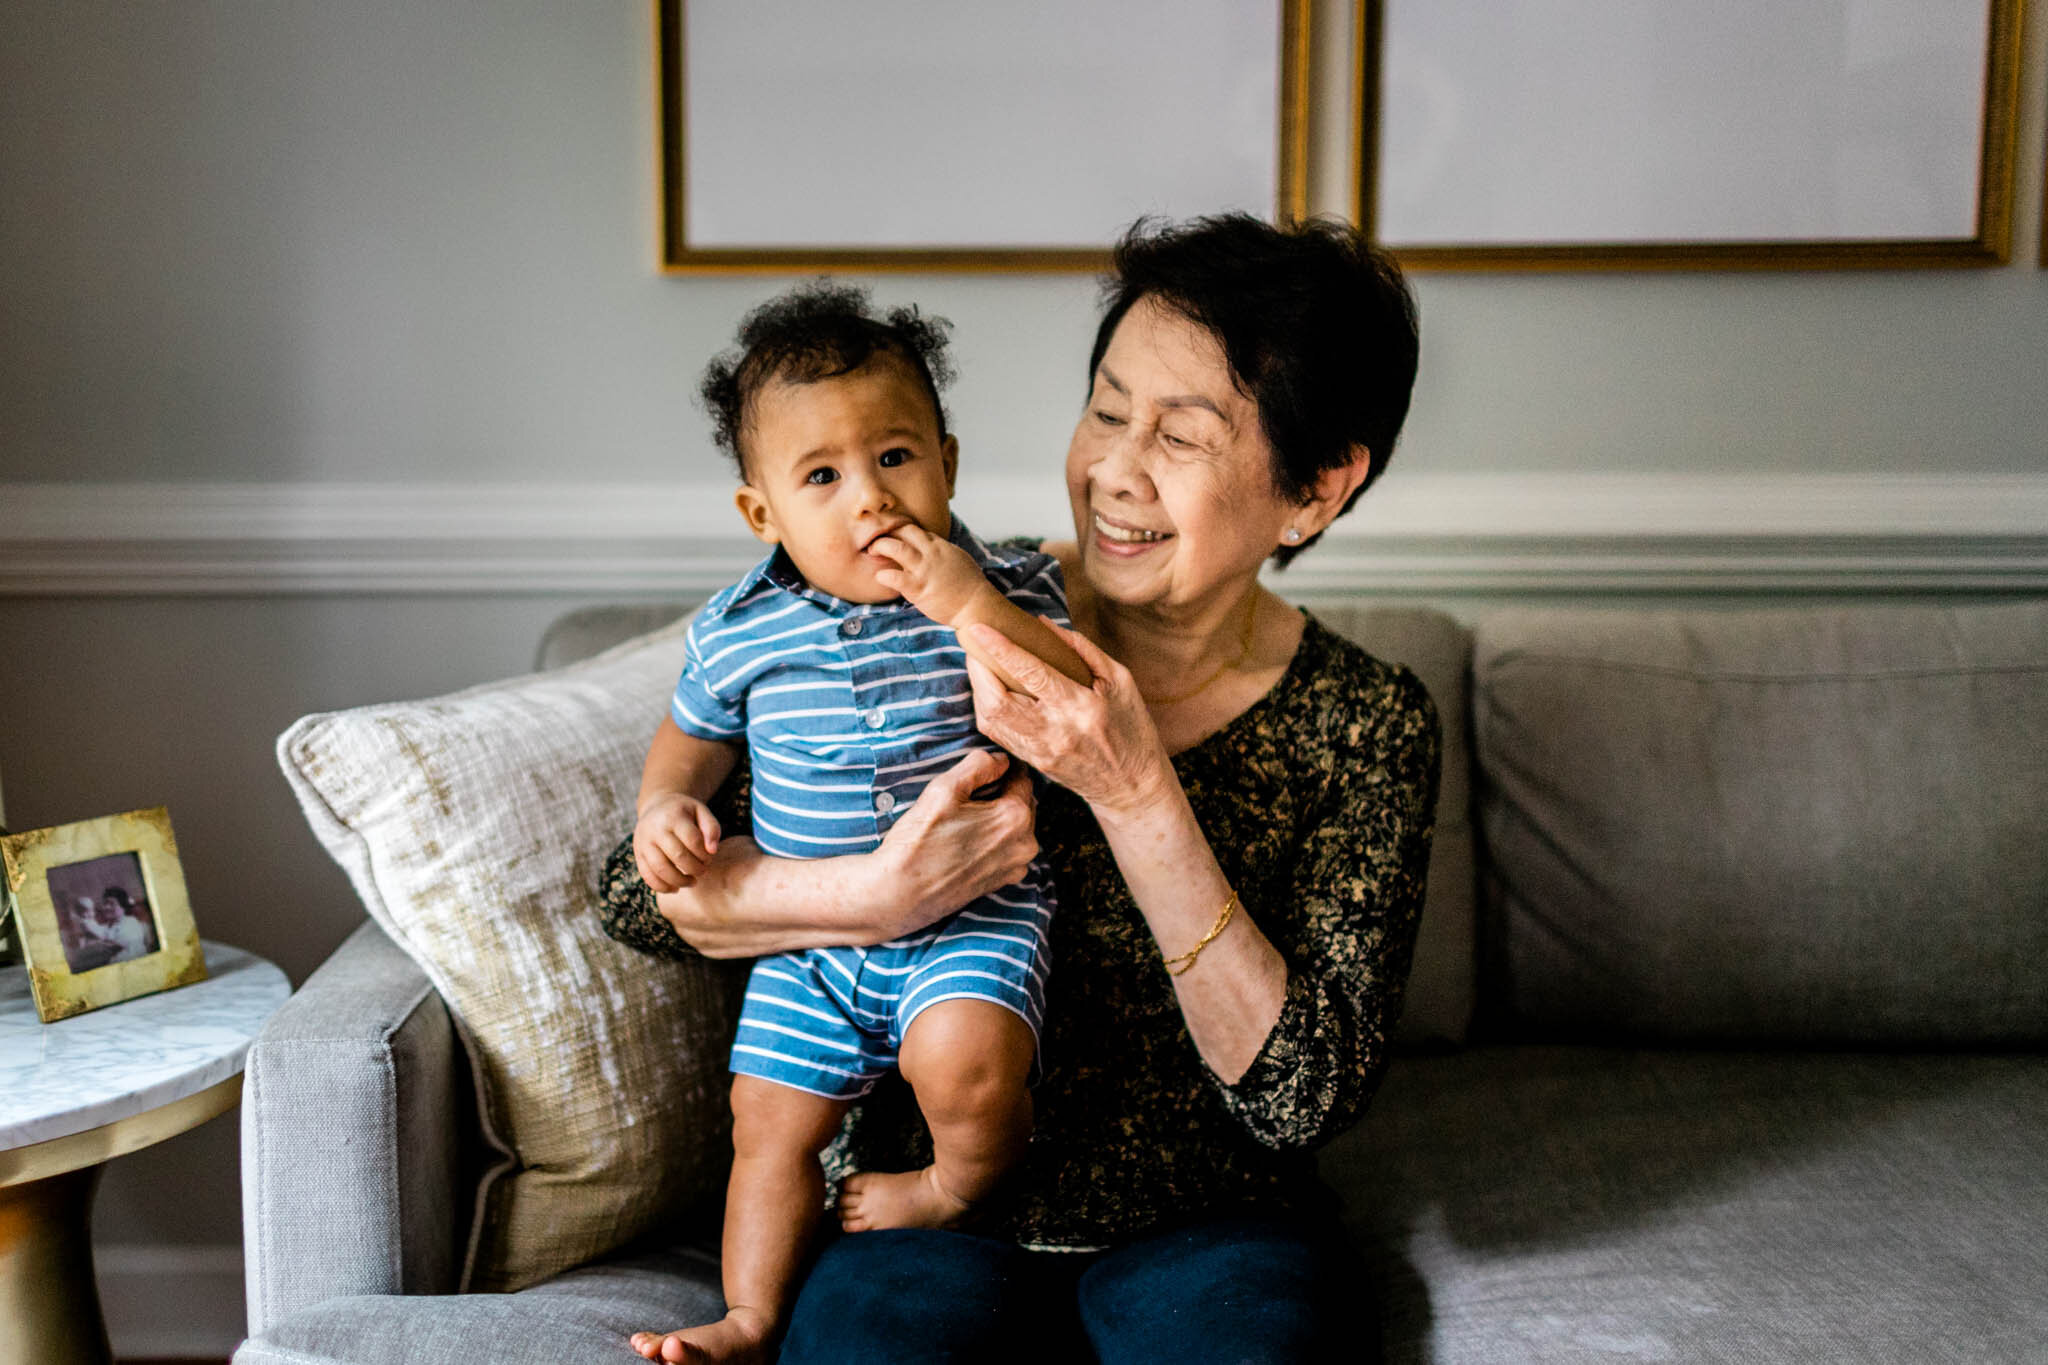 Raleigh Family Photographer | By G. Lin Photography | Woman holding baby boy on couch